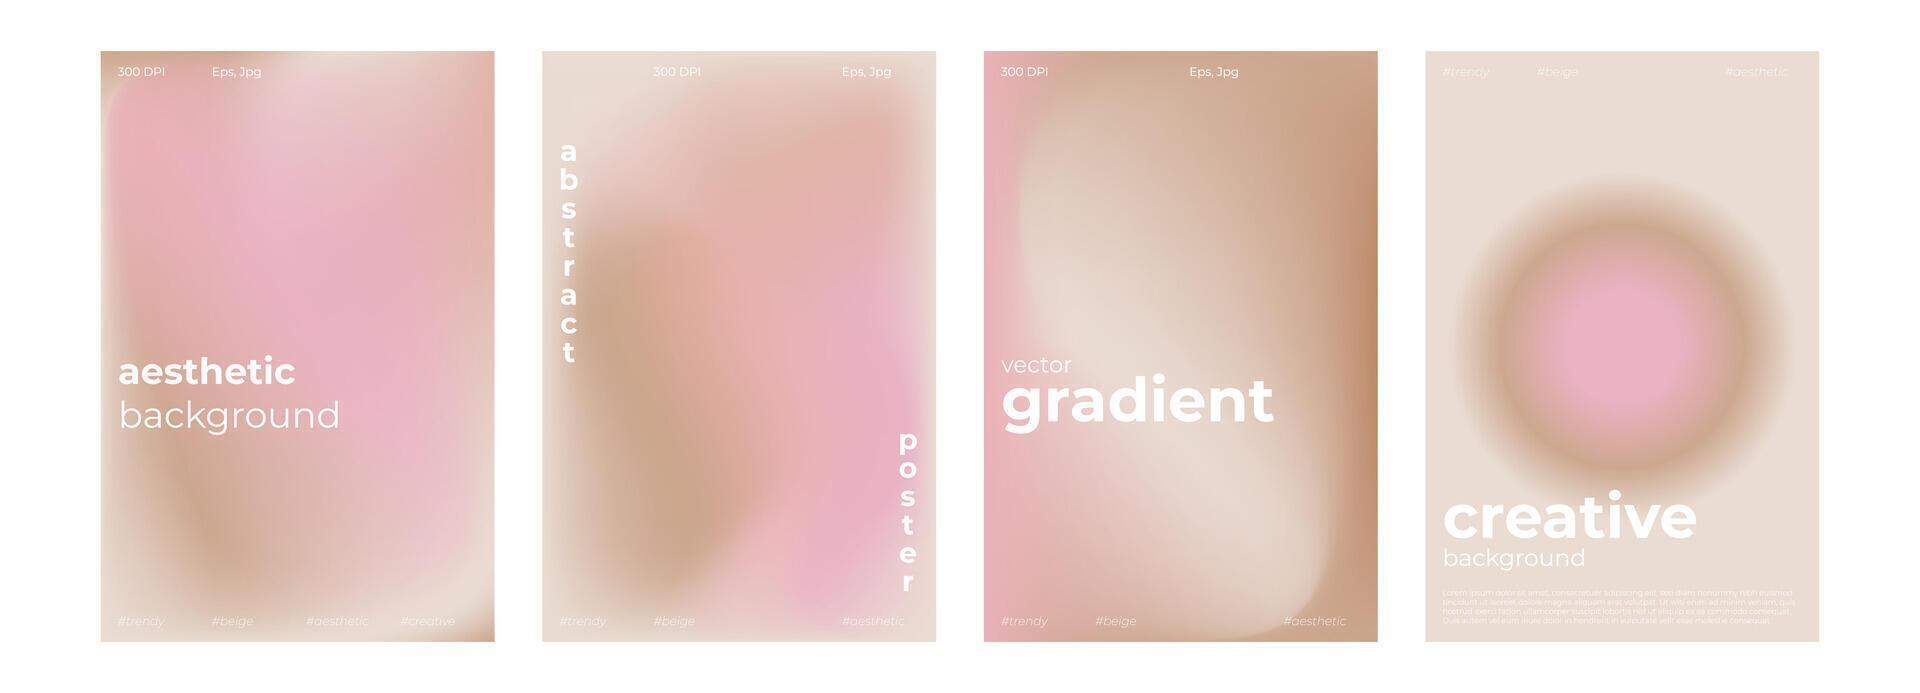 Y2k Aesthetic abstract nude gradient background with beige, pink, pastel, soft blurred pattern. Poster for social media stories, album covers, banners, templates for digital marketing vector